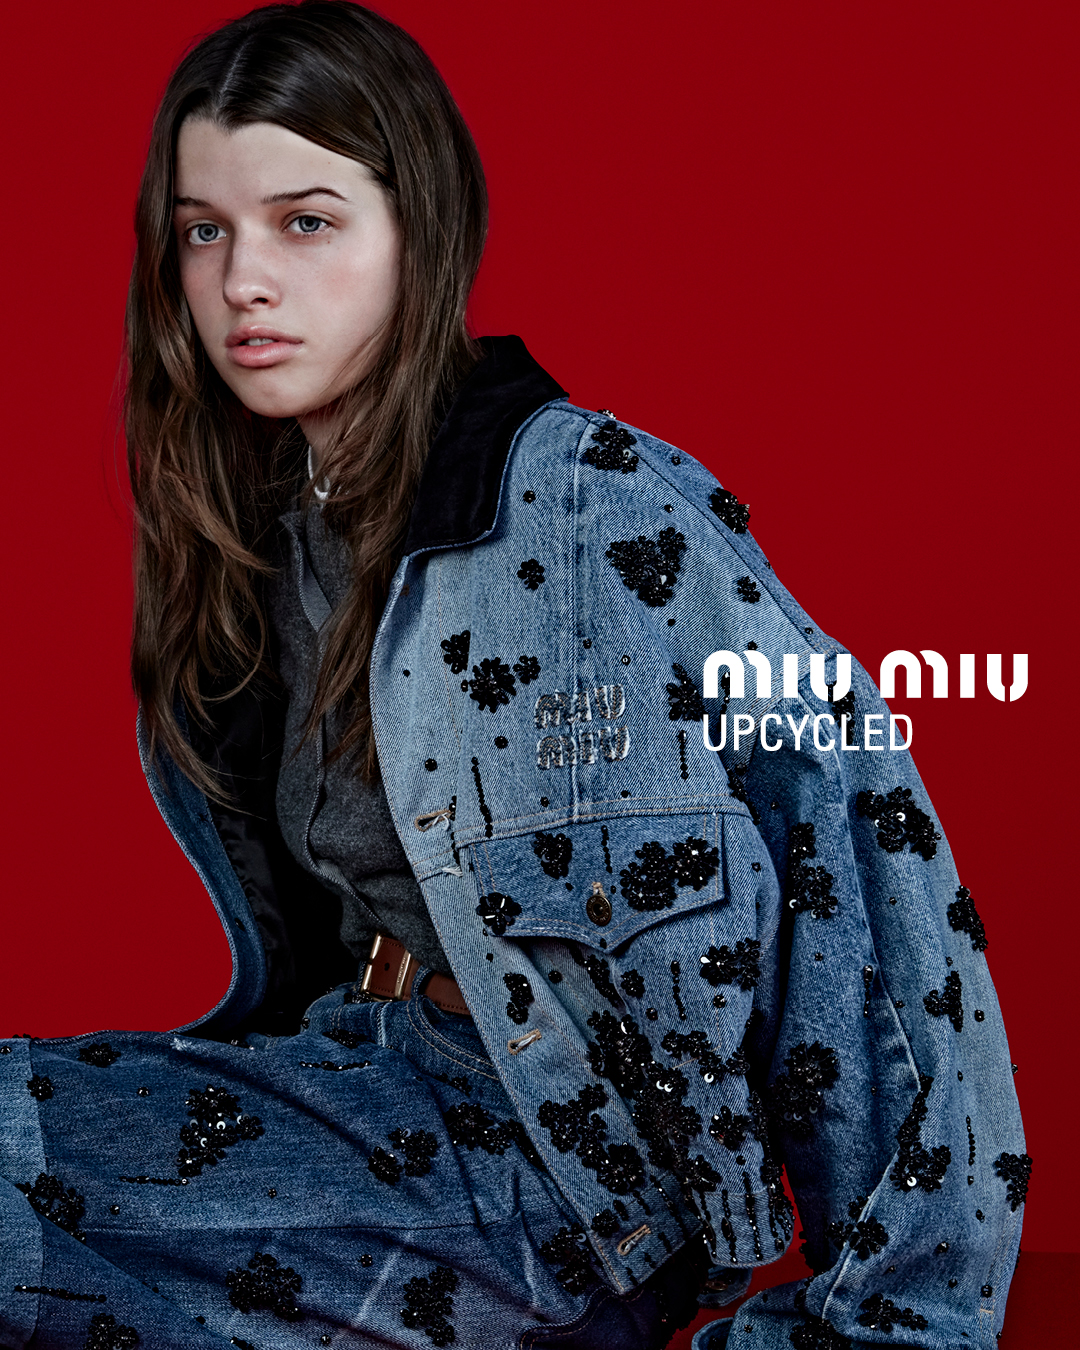 Miu Miu's 2024 Upcycled collection, including jackets, bras & accessories made of vintage denim